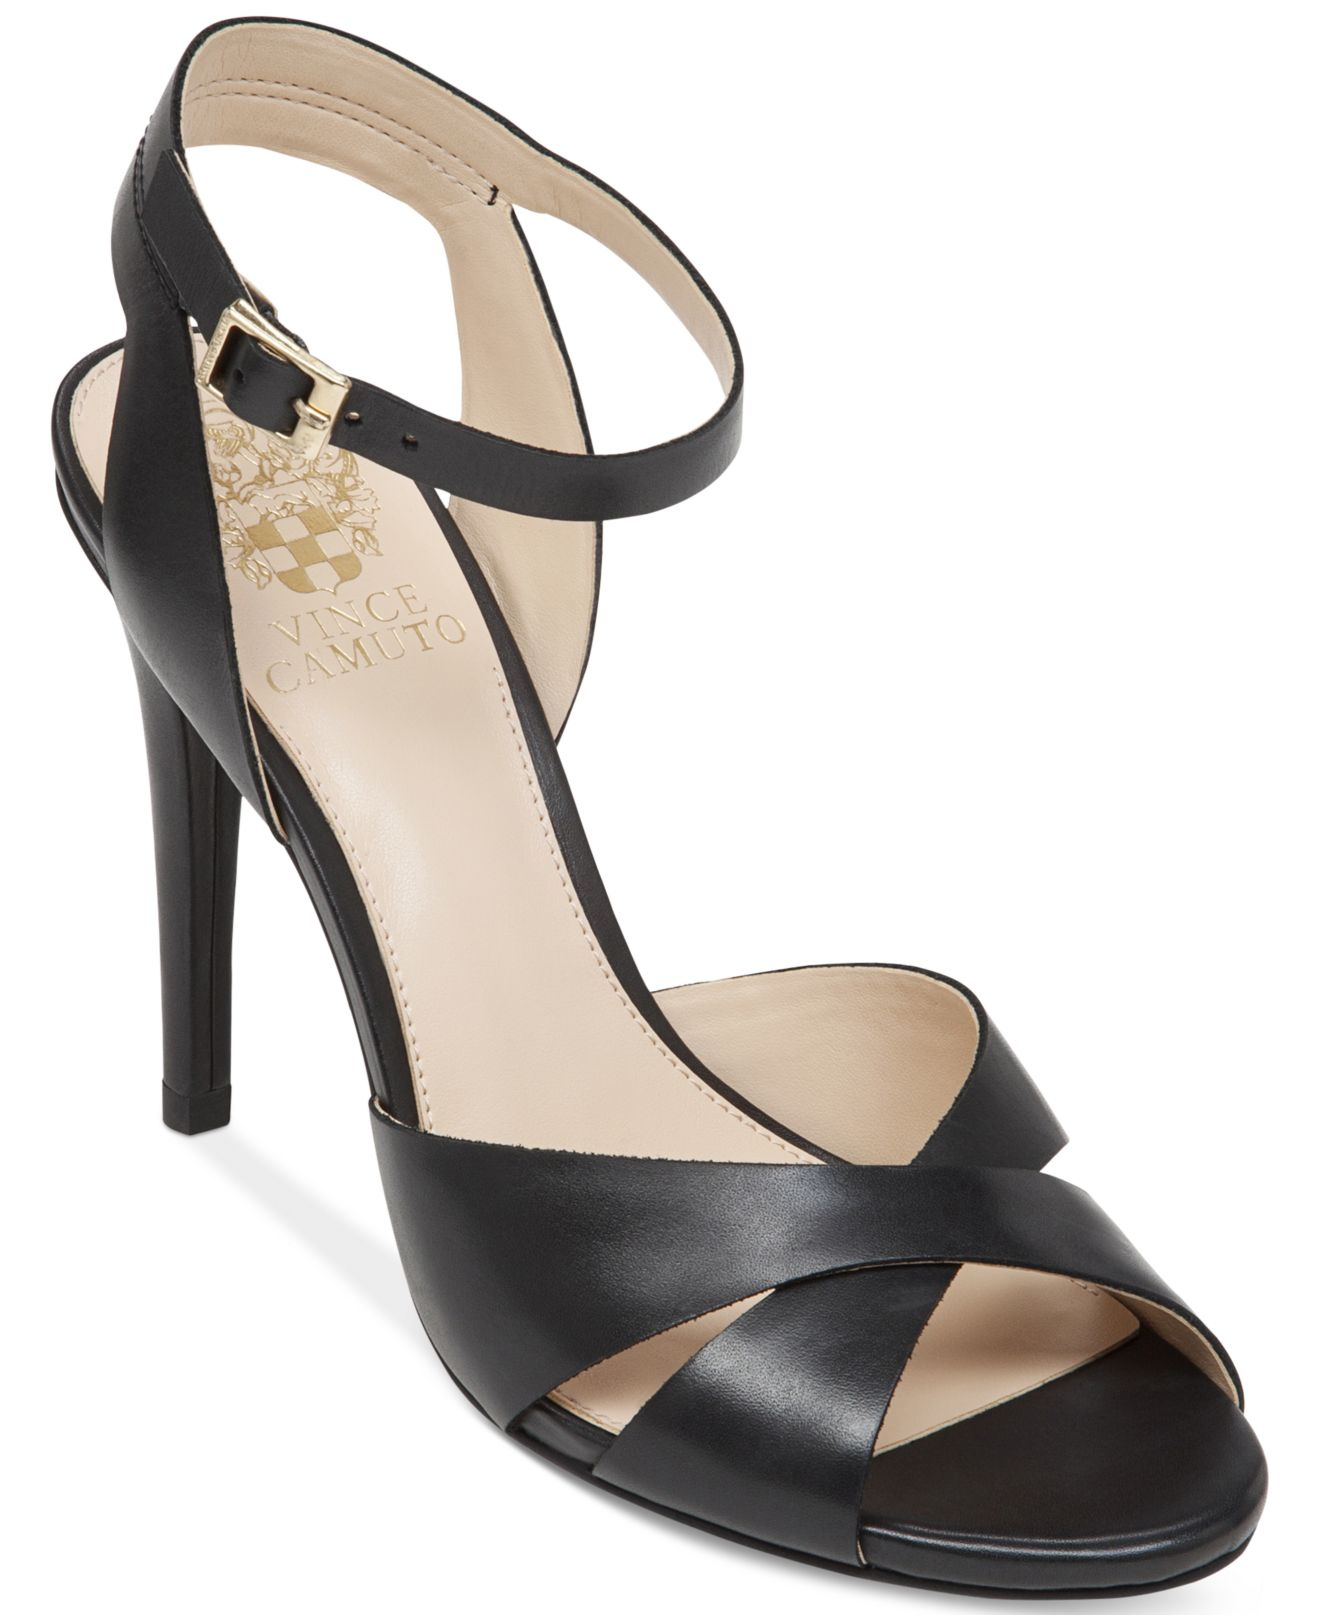 Lyst - Vince Camuto Soliss High Heel Sandals in Black